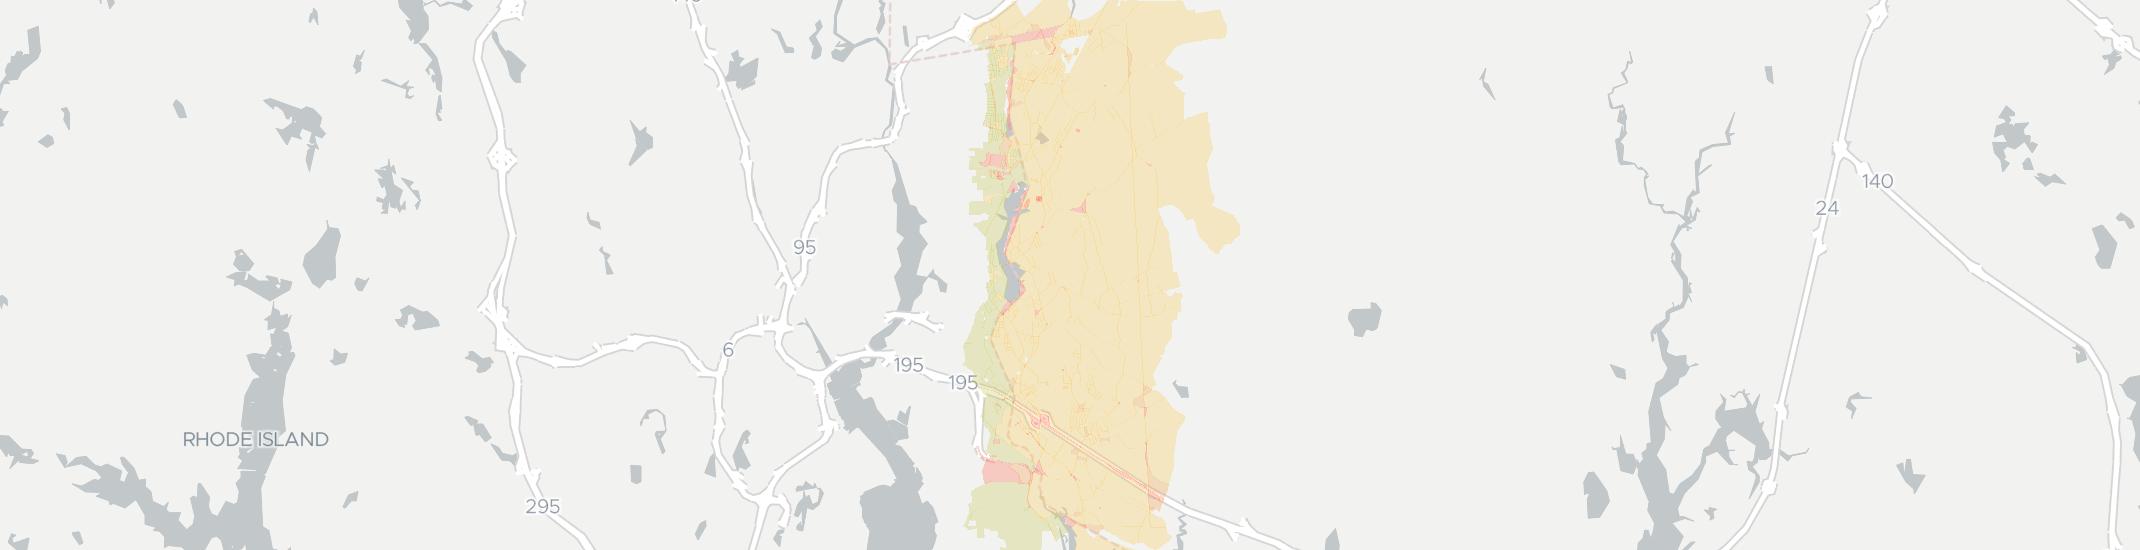 Seekonk Internet Competition Map. Click for interactive map.